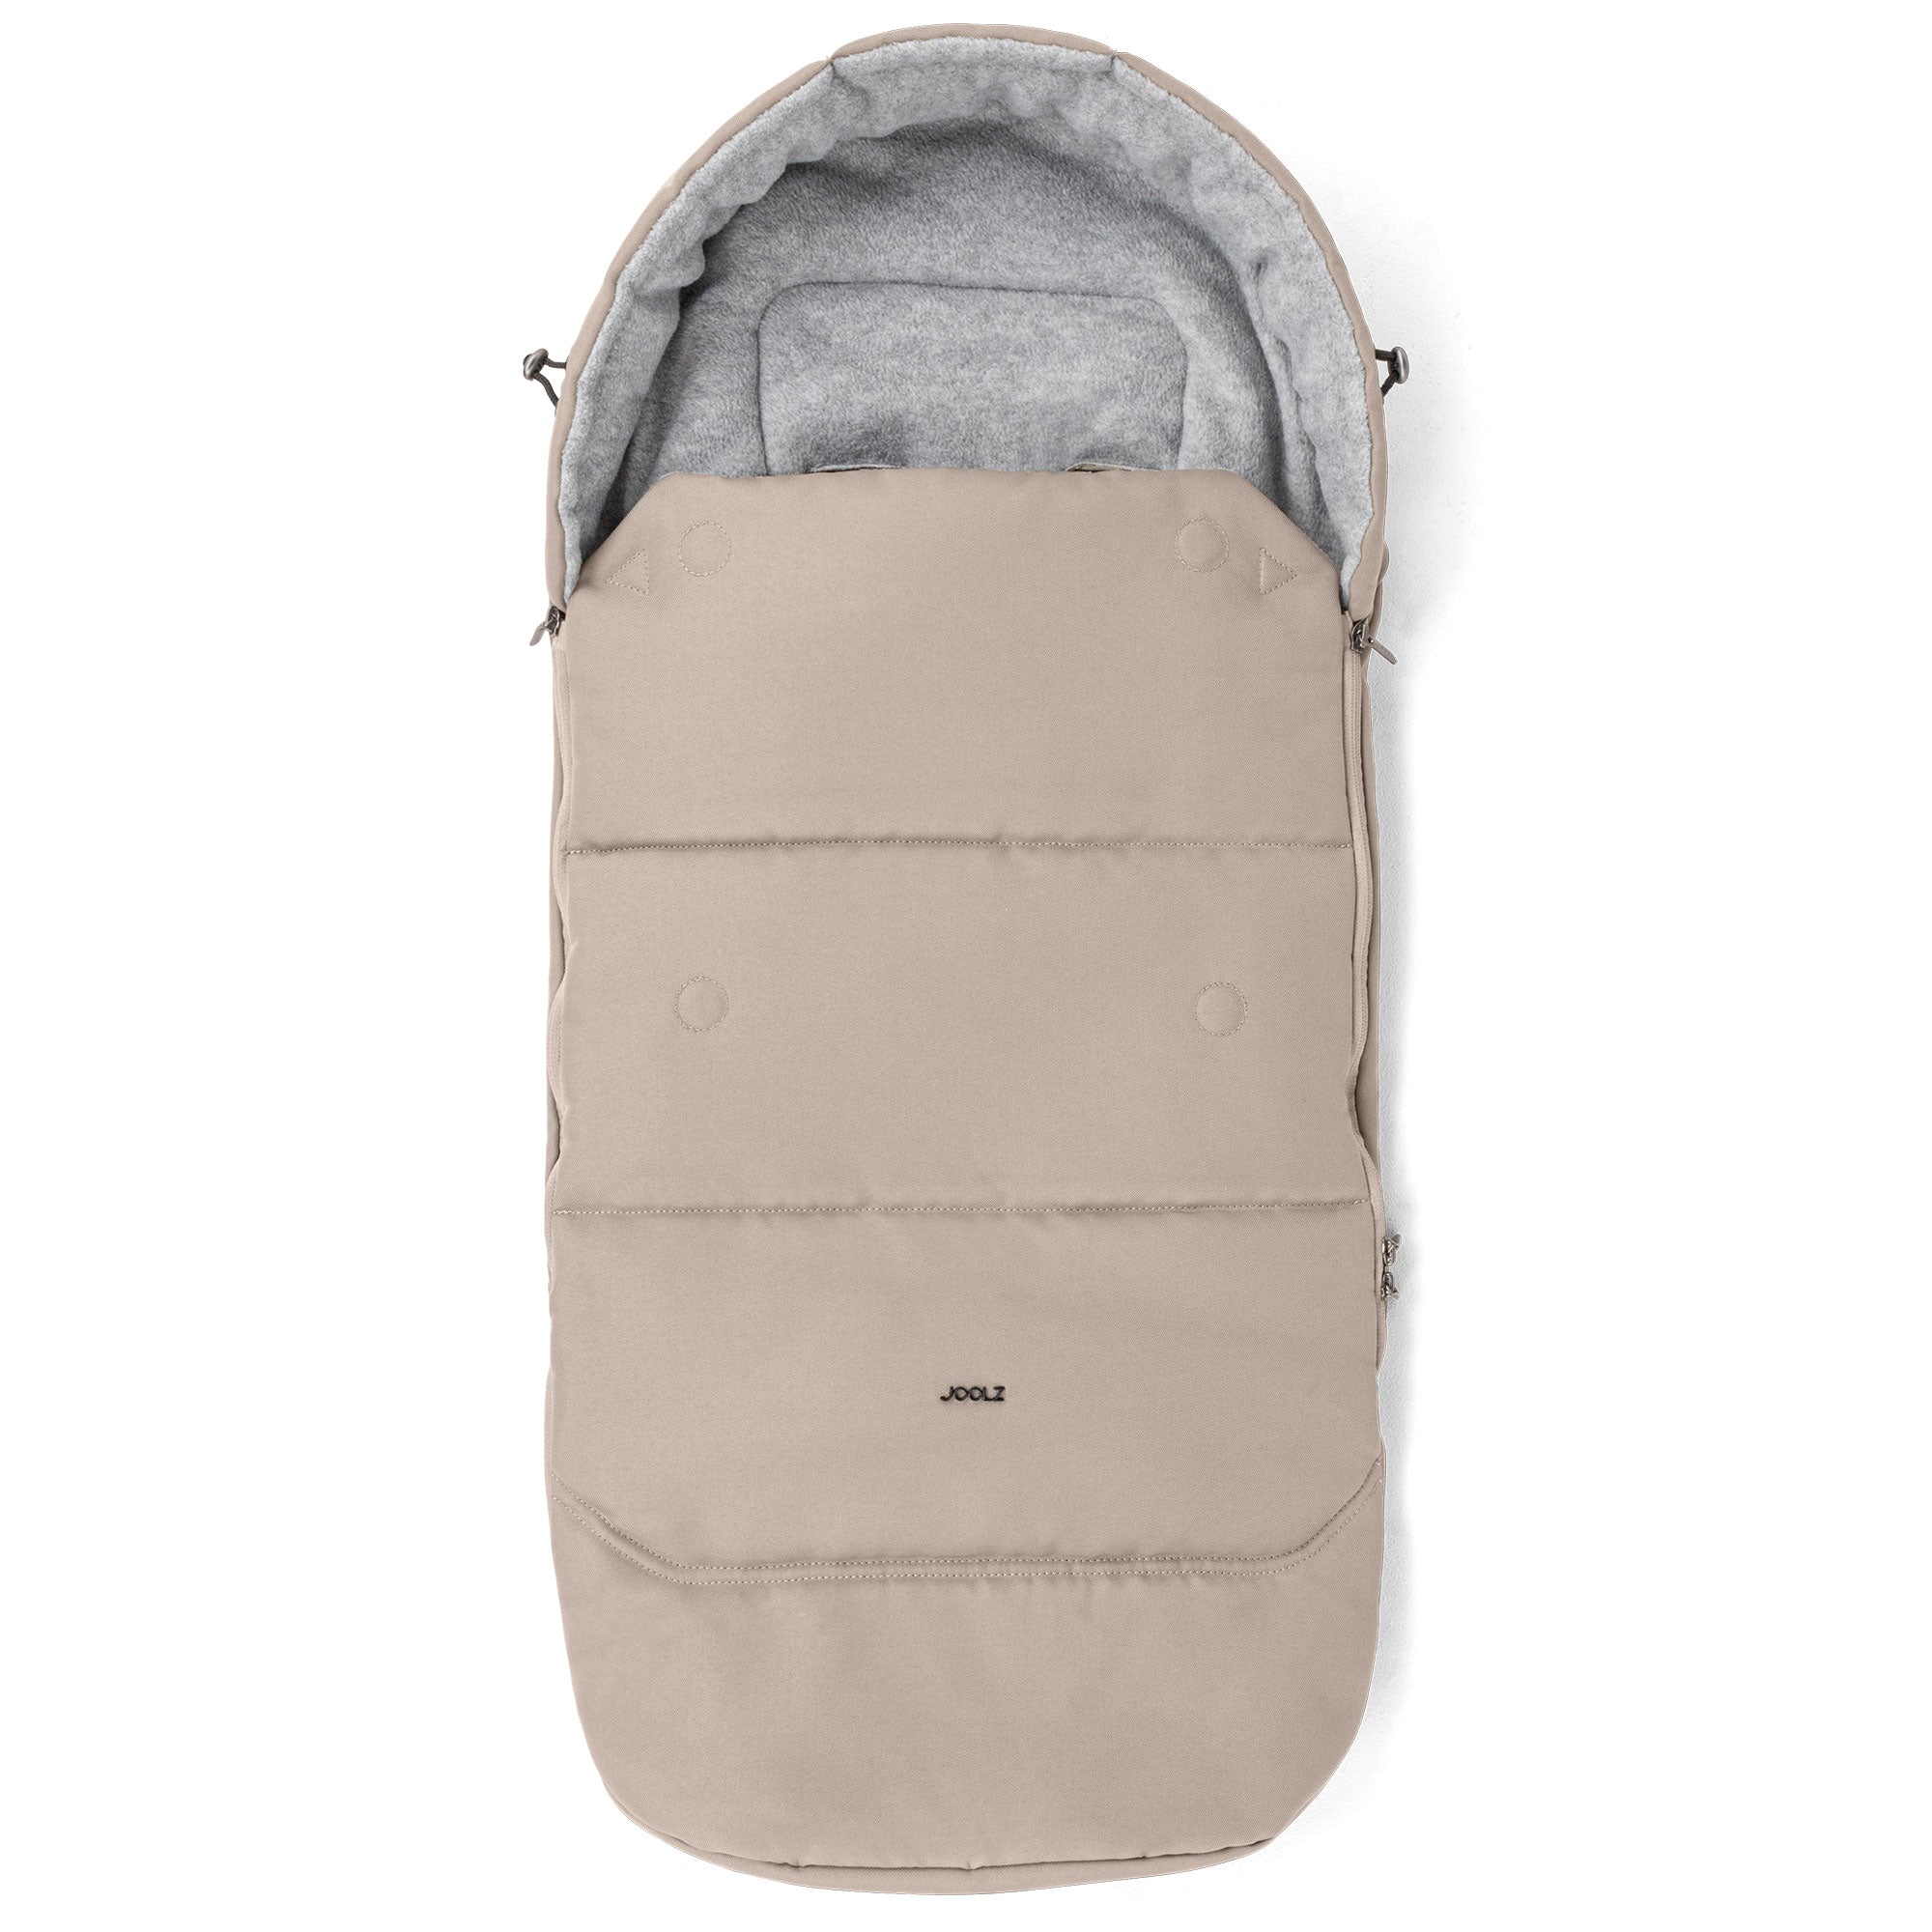 Joolz Universal Footmuff in Sandy Taupe Footmuffs & Liners 560213 8715688088739